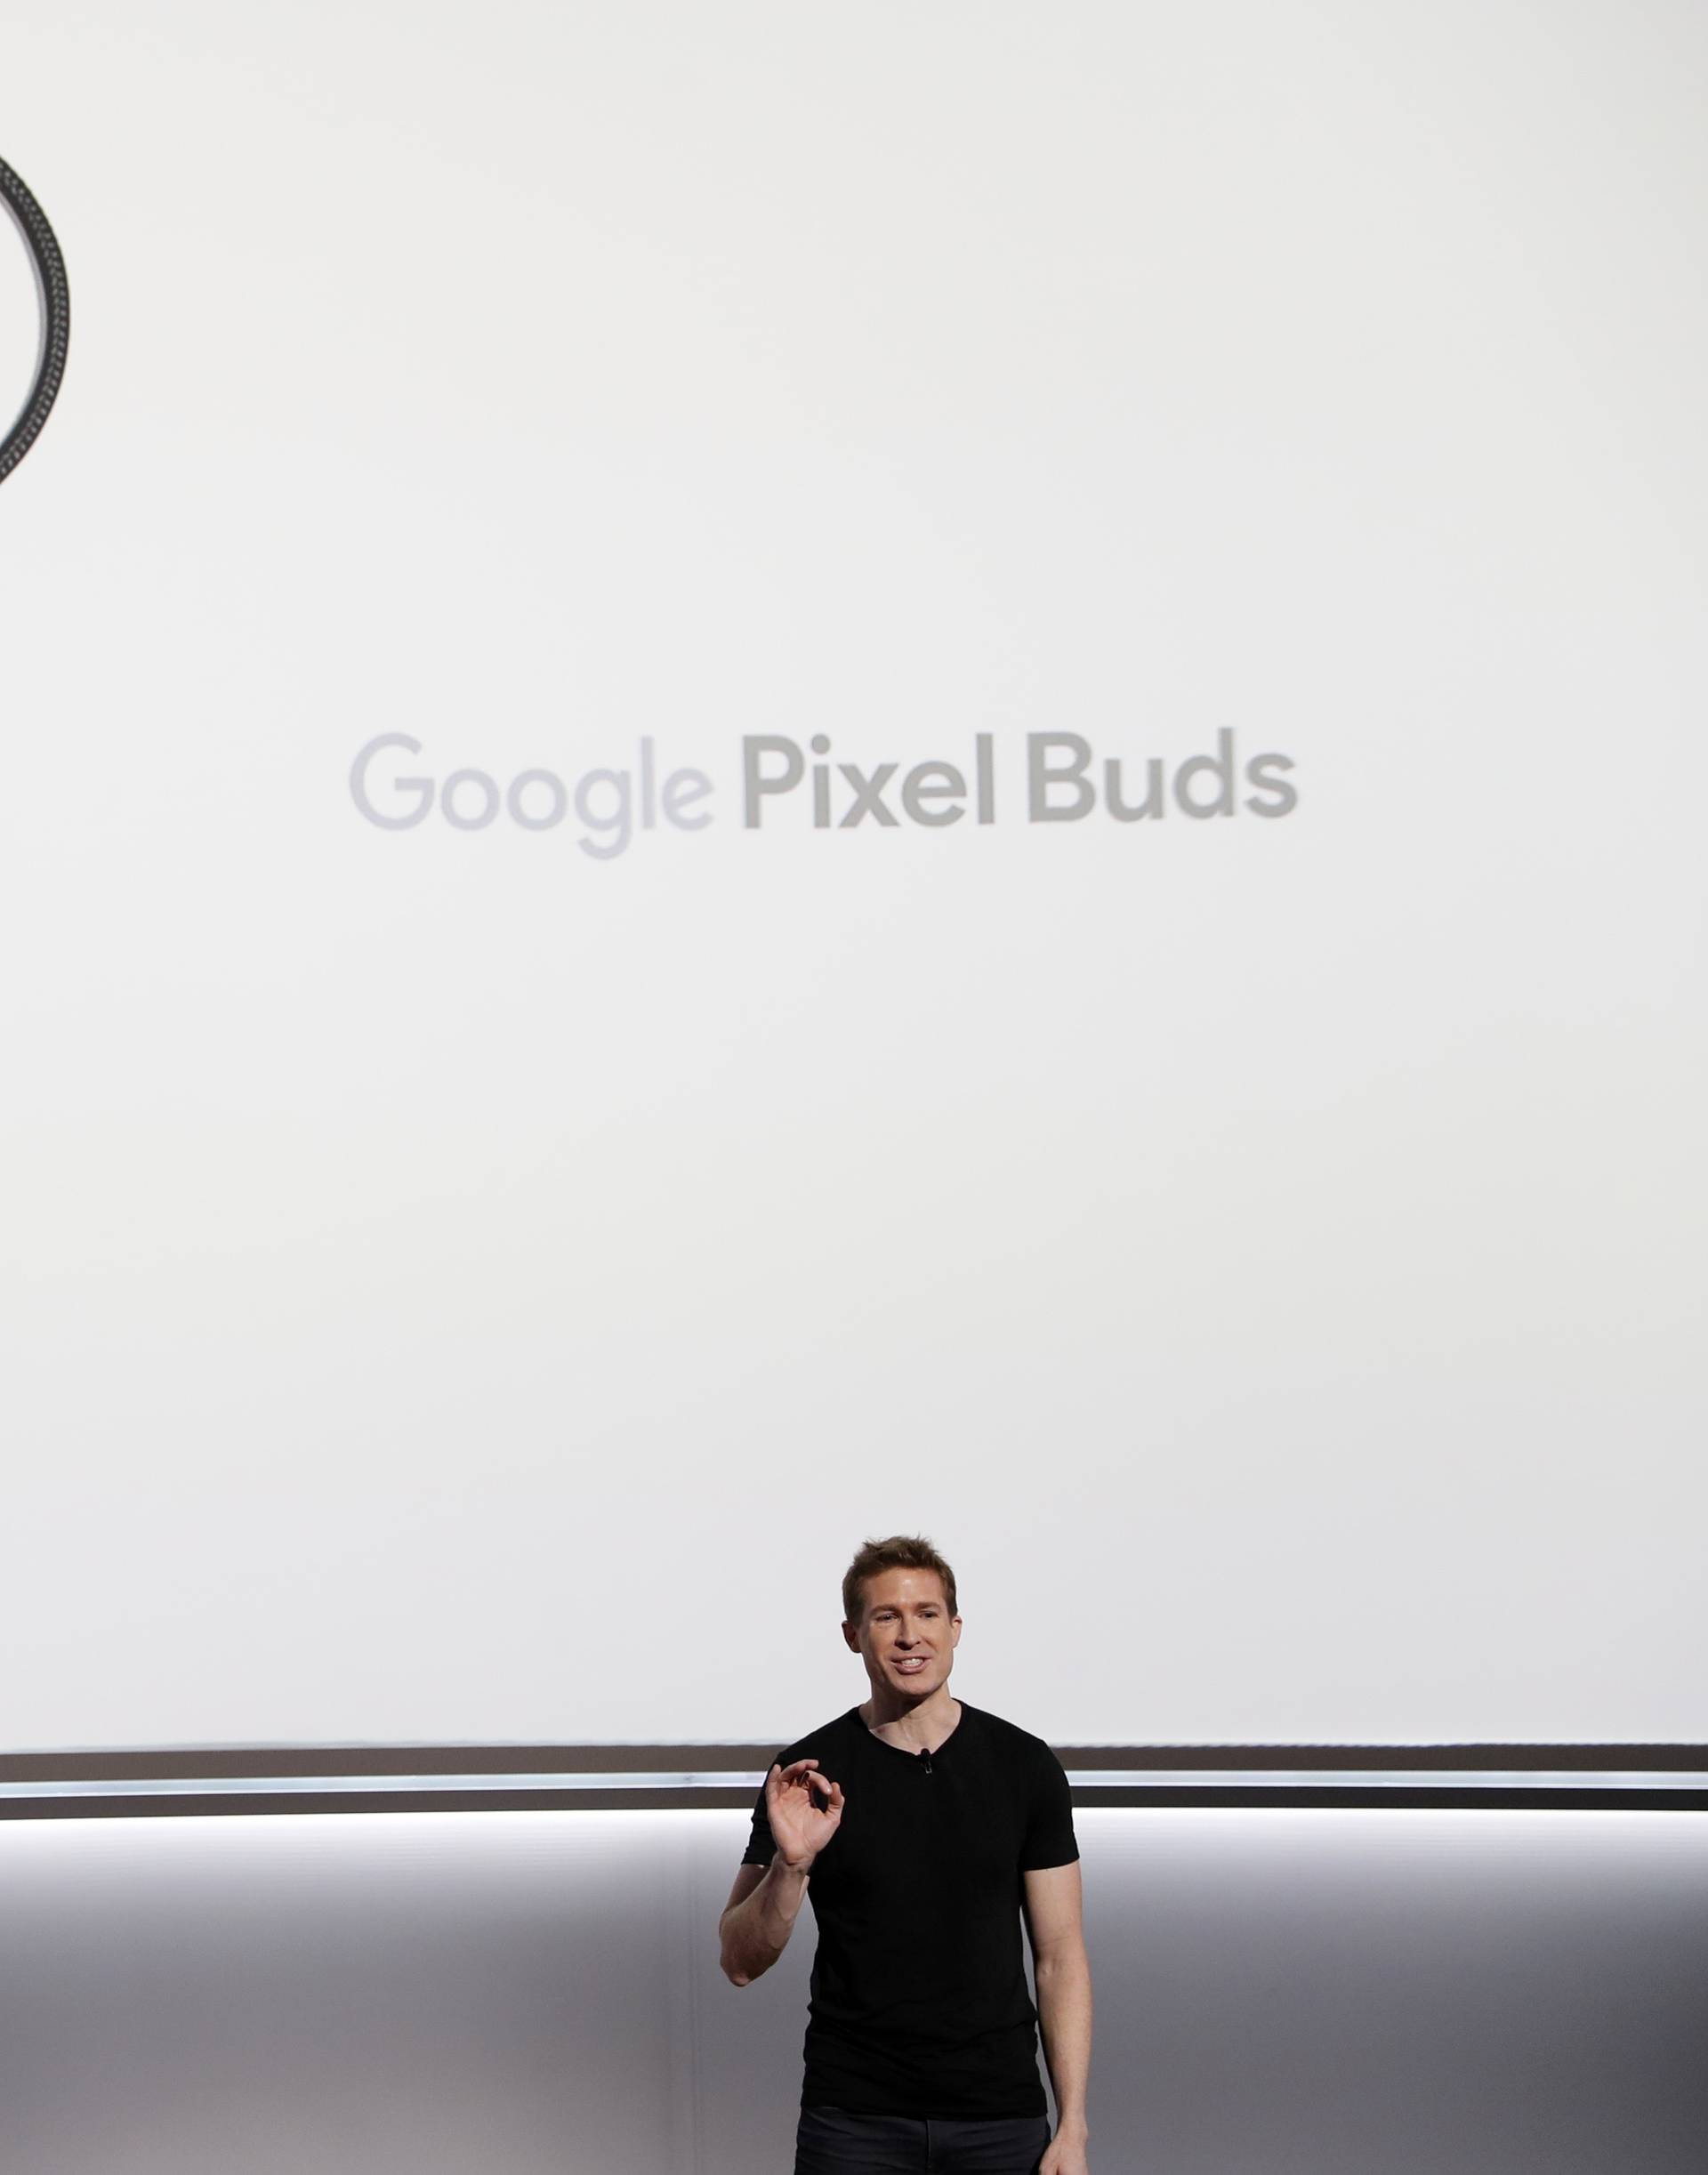 Google's Payne speaks during a launch event in San Francisco